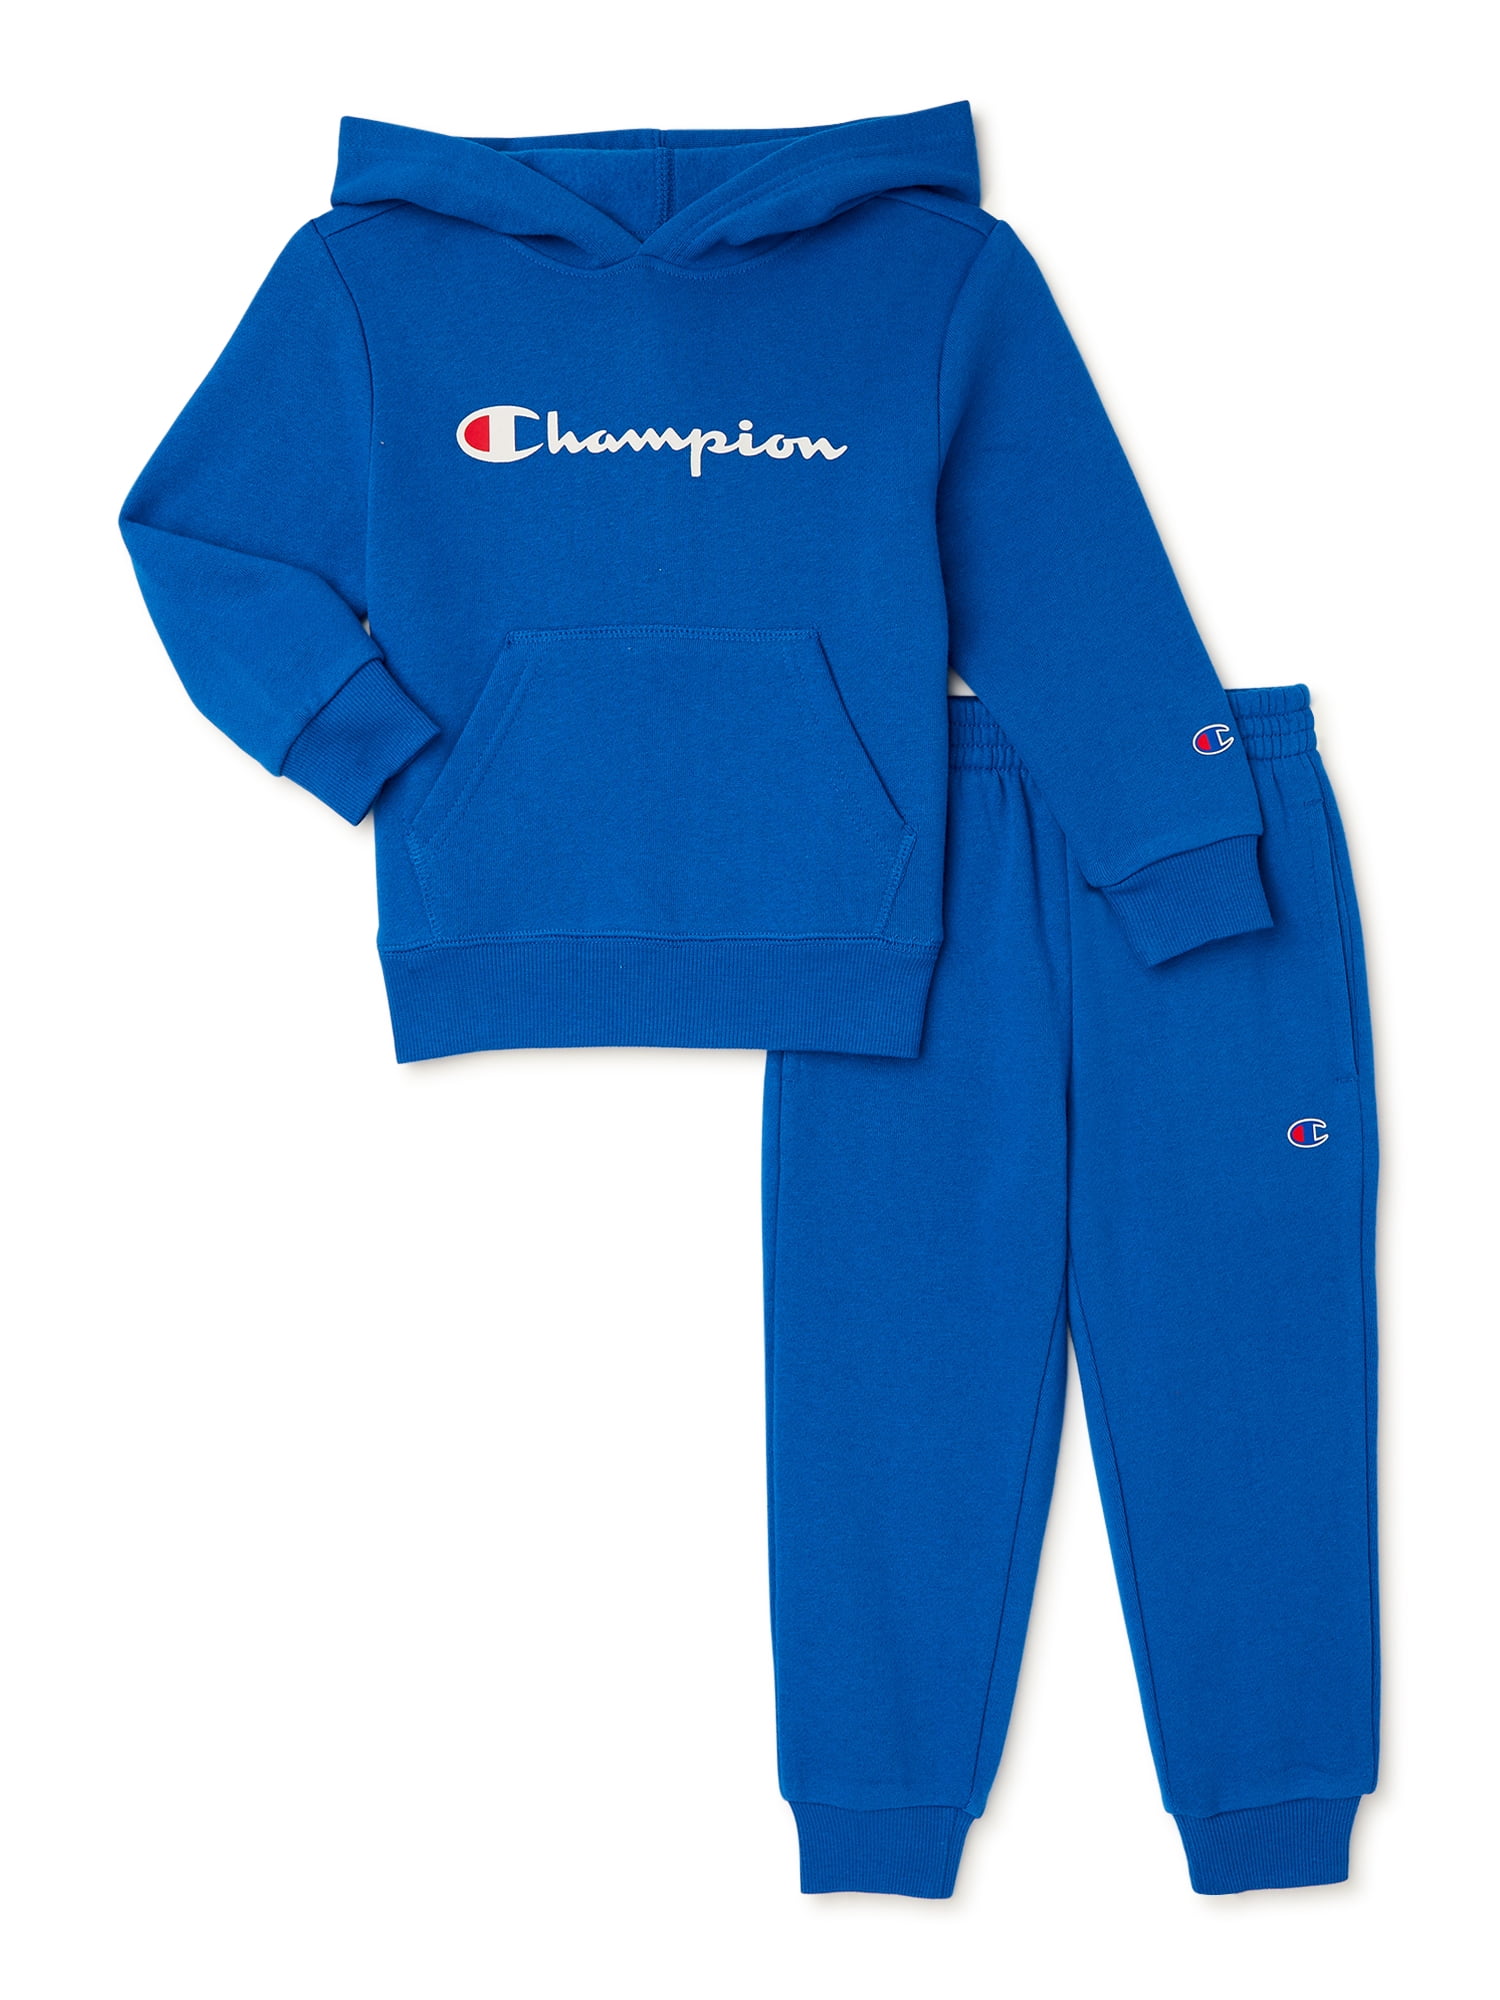 Champion Toddler Boys\' Matching Hoodie and Jogger Set, 2-Piece, Size 2T-4T